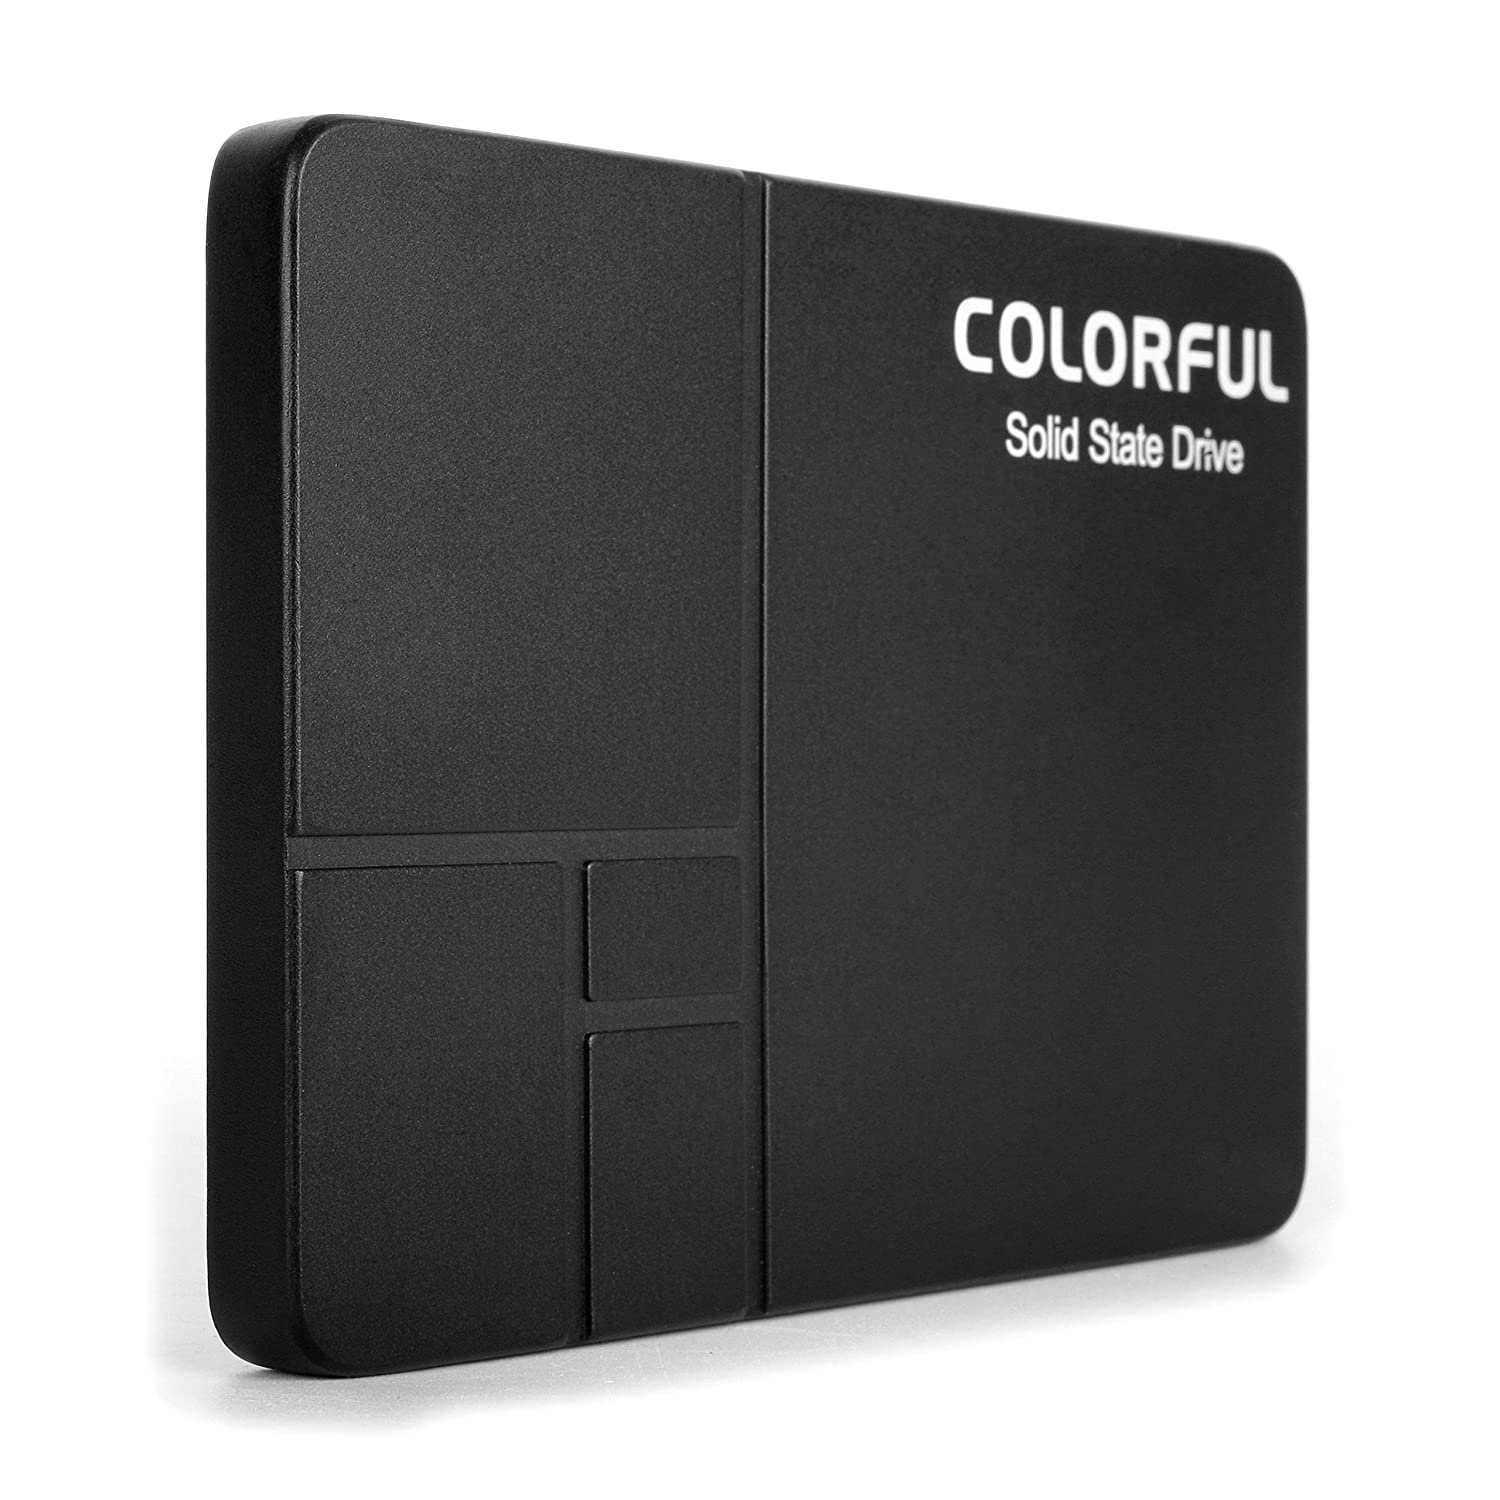 Colorful SSD SL300 128GB Plus Series- 3D Nand SATA 3 Solid State Drive